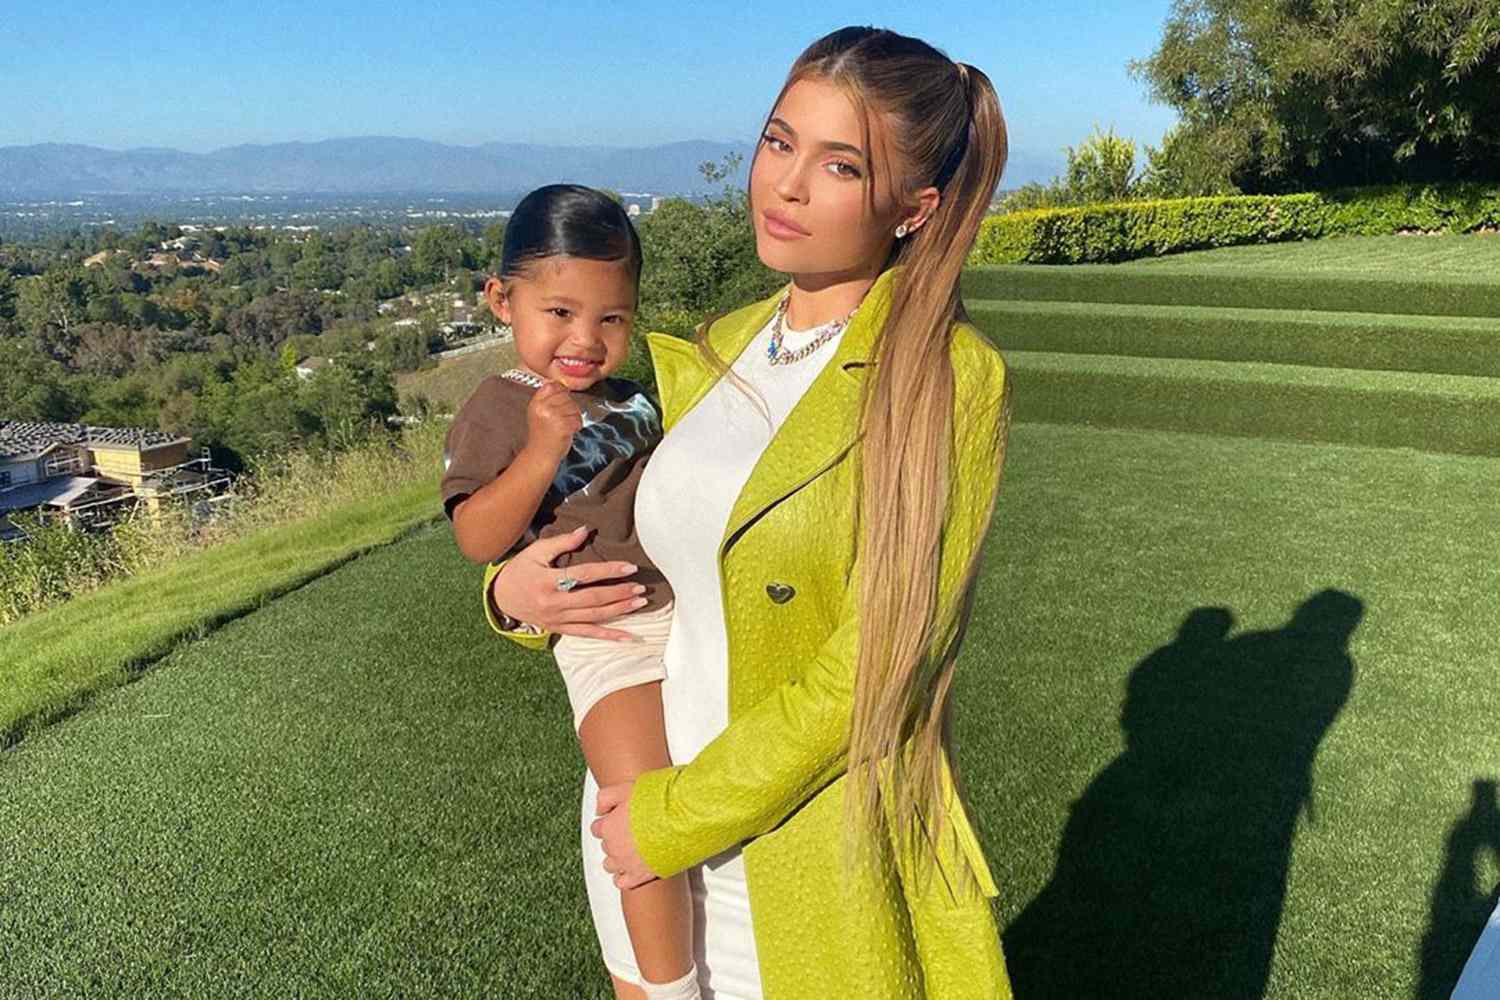 Kylie Jenner Proves Stormi's Her Twin in Side-by-Side Photo of Her Daughter and Herself as a Child - PEOPLE